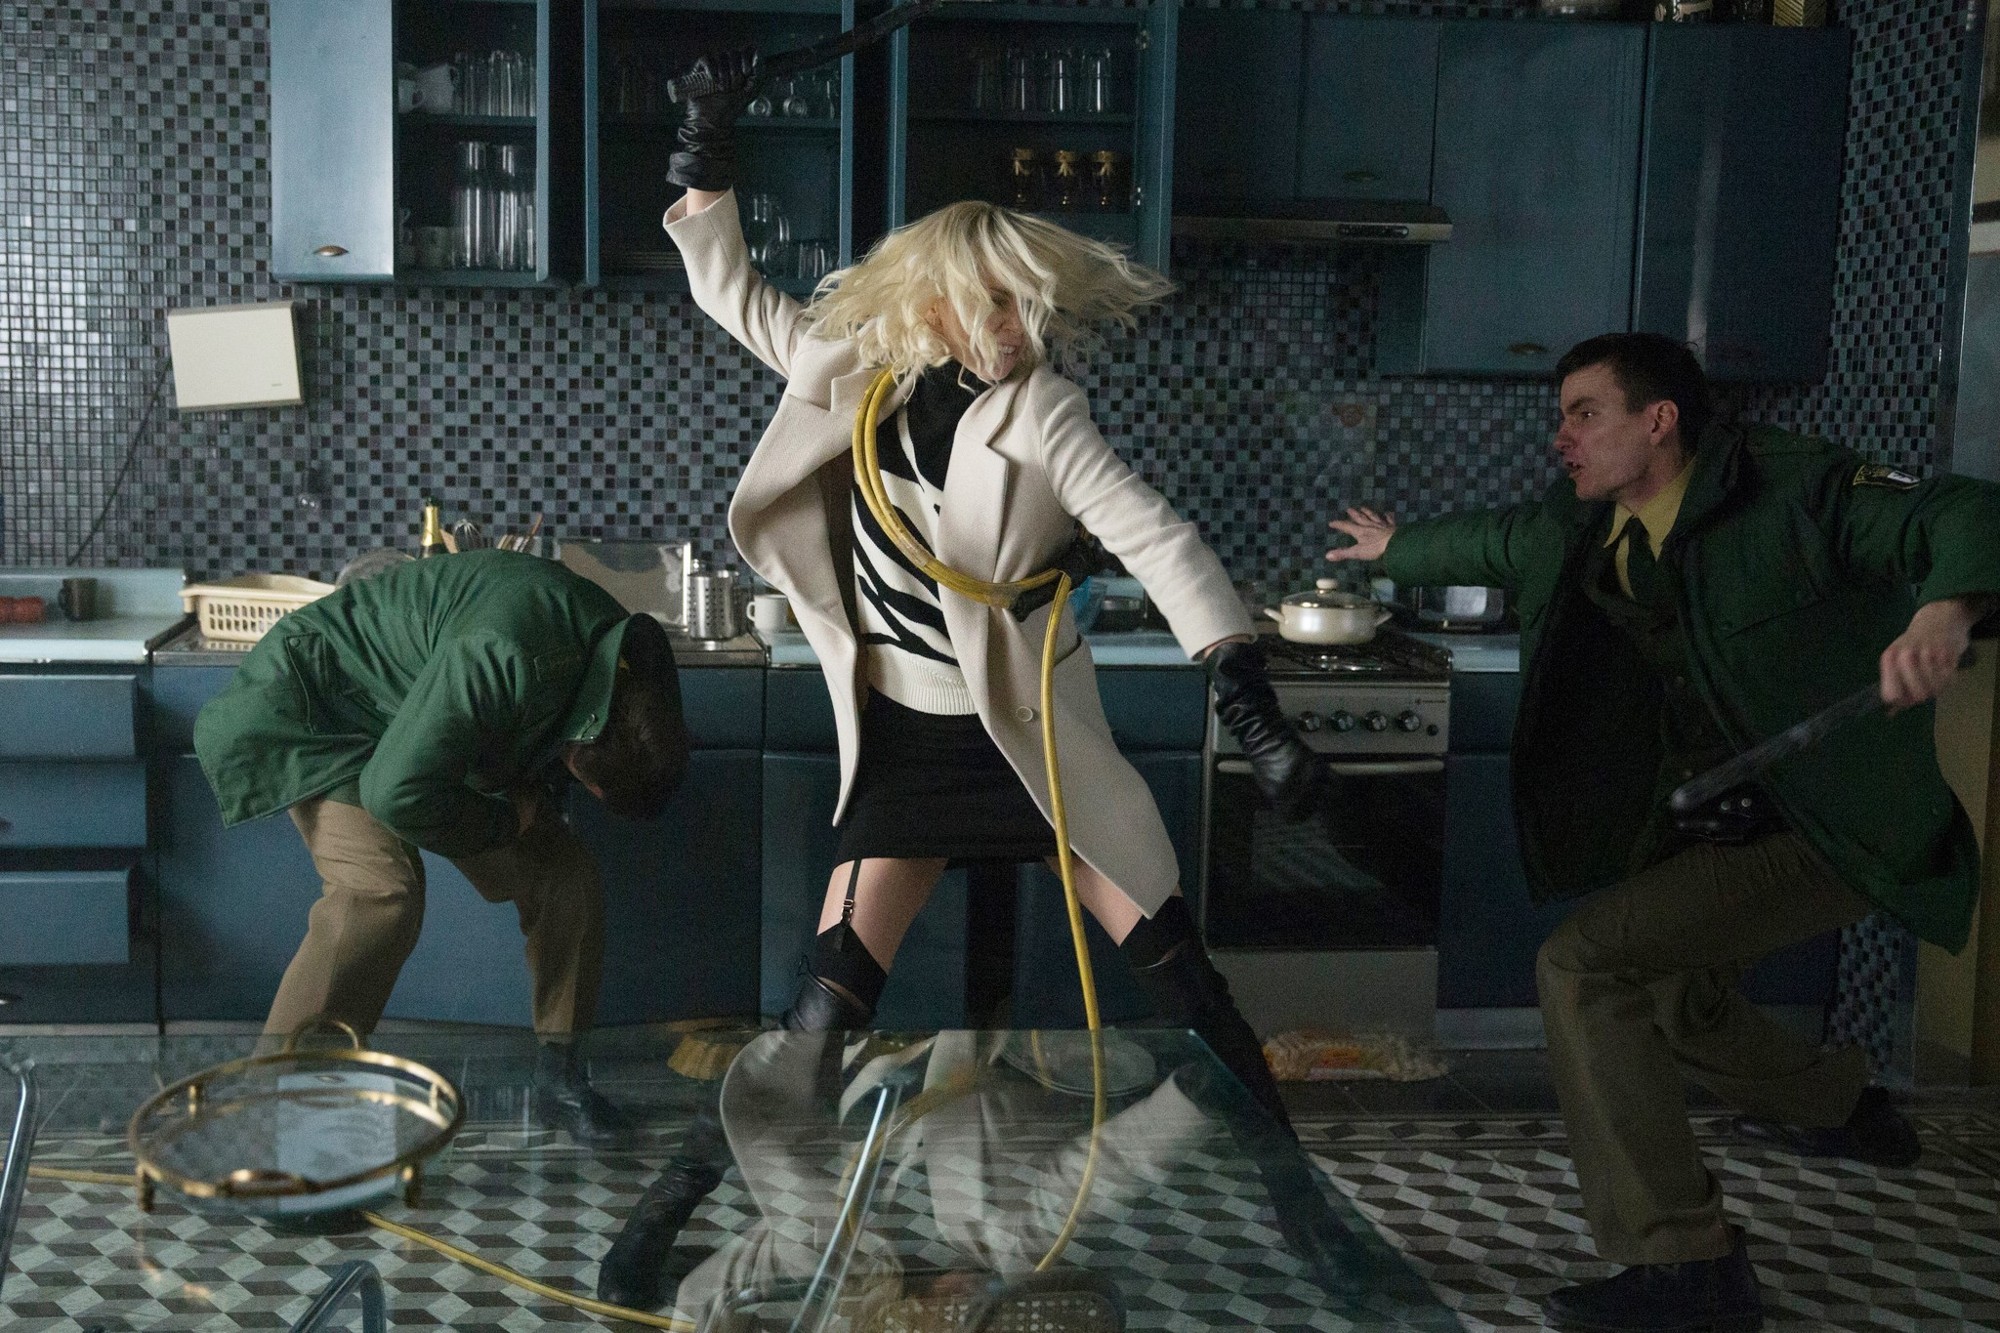 Charlize Theron stars as Lorraine Broughton in Focus Features' Atomic Blonde (2017)